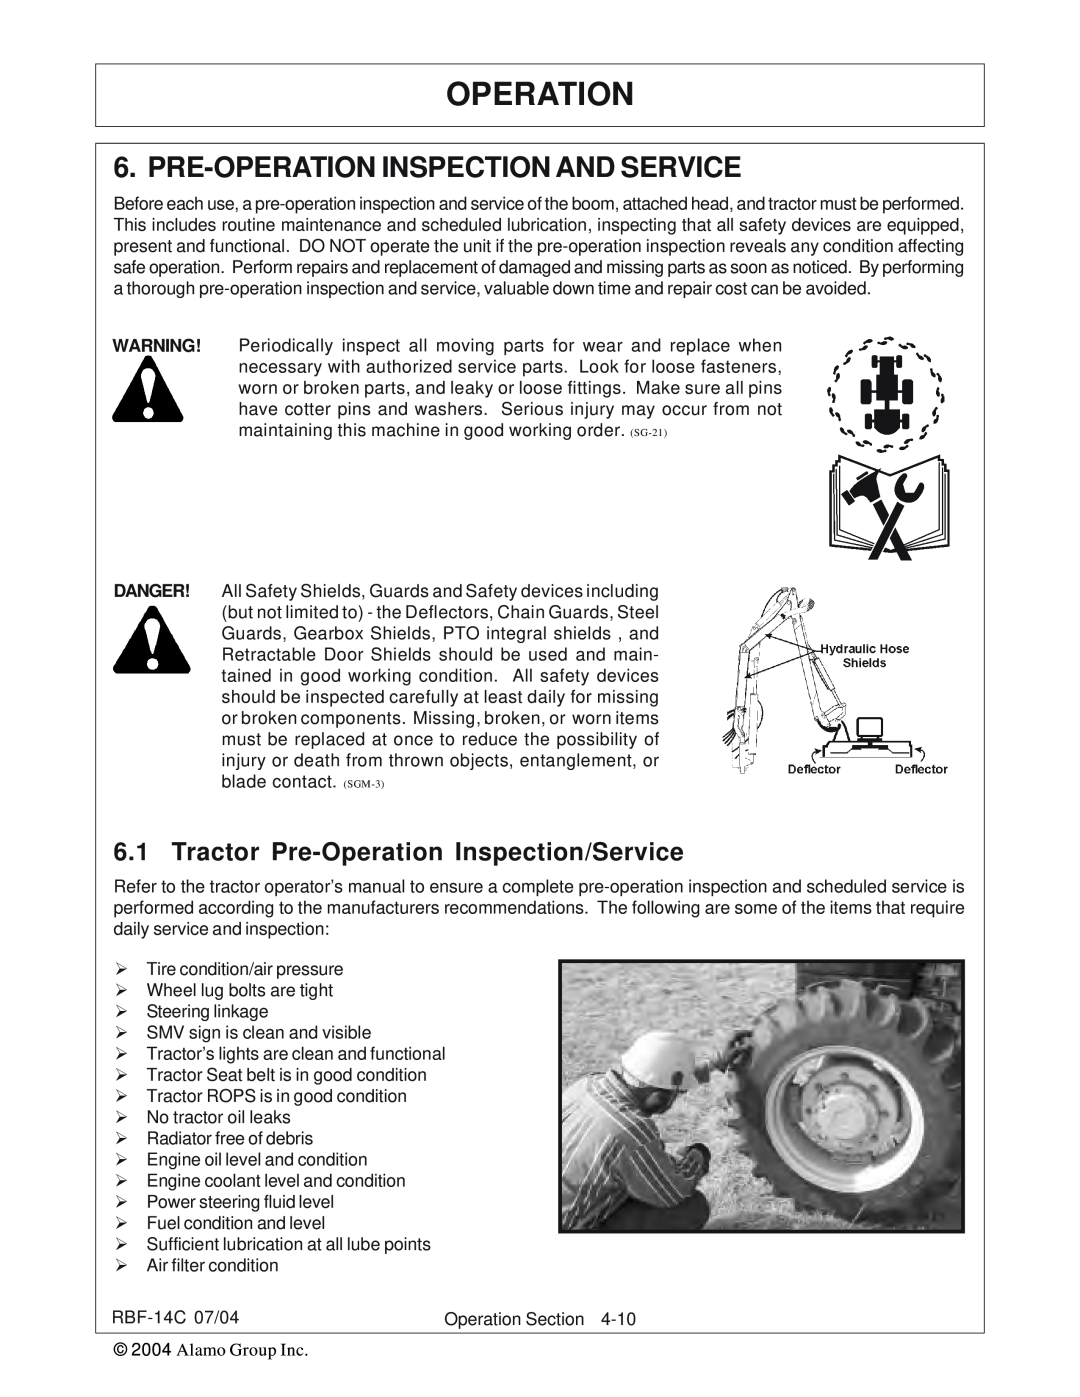 Tiger RBF-14C manual Pre-Operationinspection And Service, Tractor Pre-OperationInspection/Service 